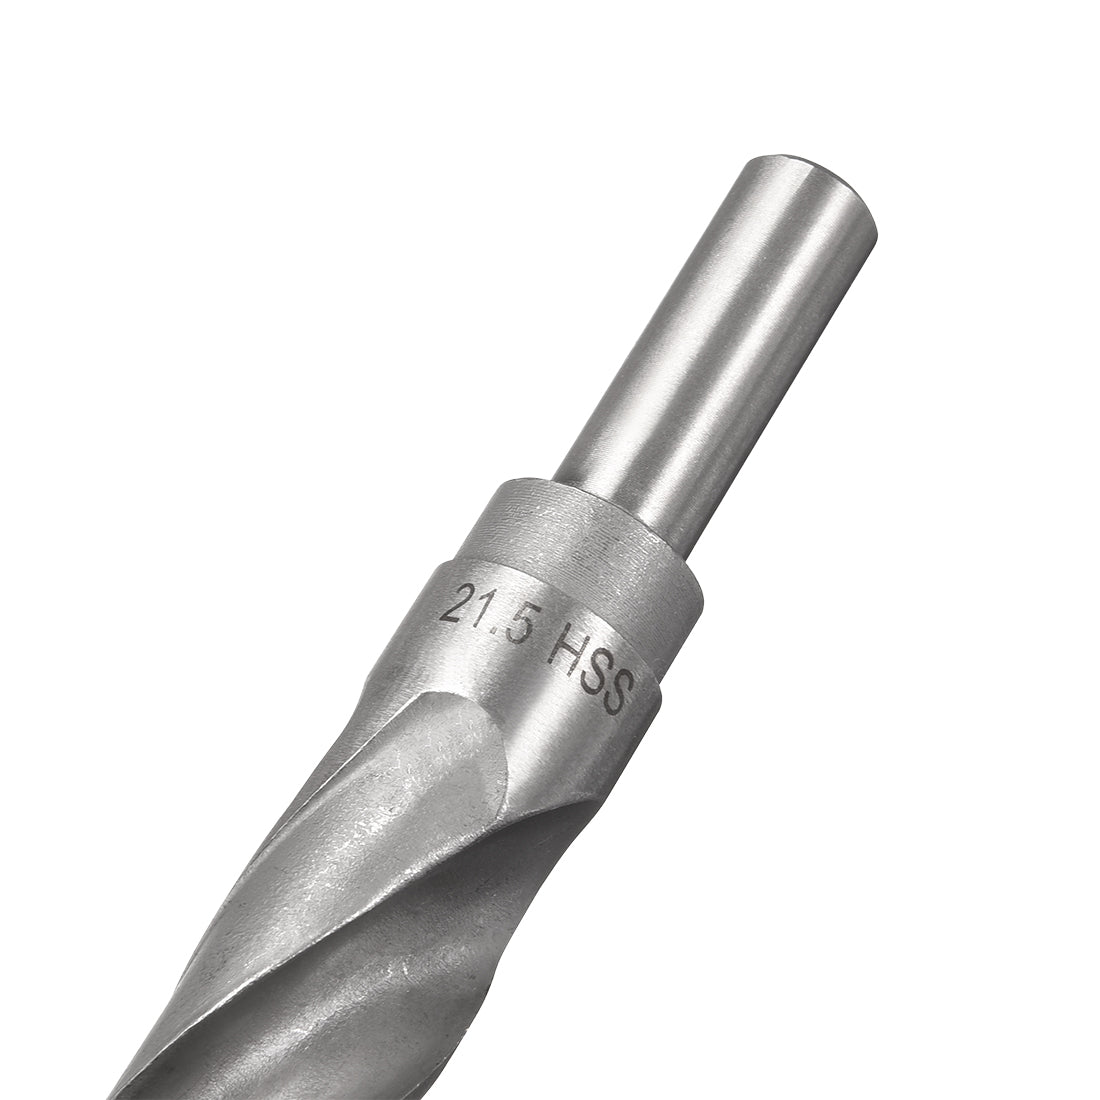 uxcell Uxcell 21.5mm Reduced Shank Drill Bit High Speed Steel 4241 with 1/2" Straight Shank